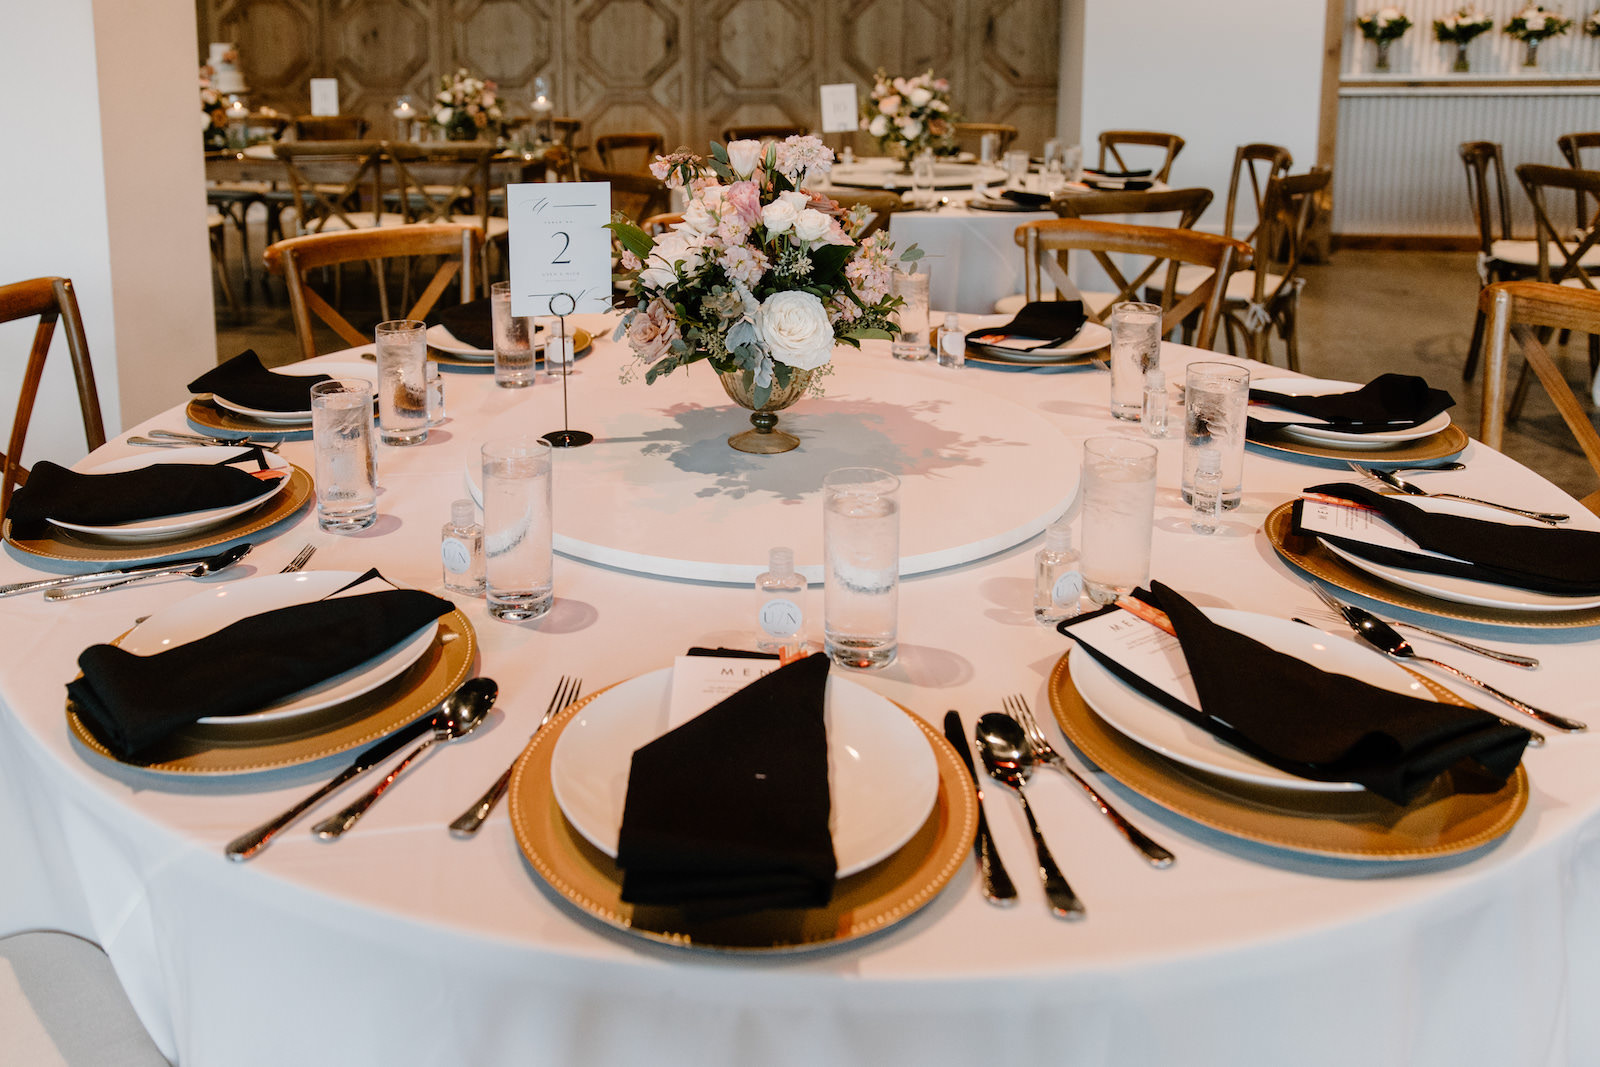 Neutral Modern Boho Wedding Reception Decor, Gold Chargers with Black Linen Napkins, Low Floral Centerpiece | Tampa Bay Wedding Florist Iza's Flowers